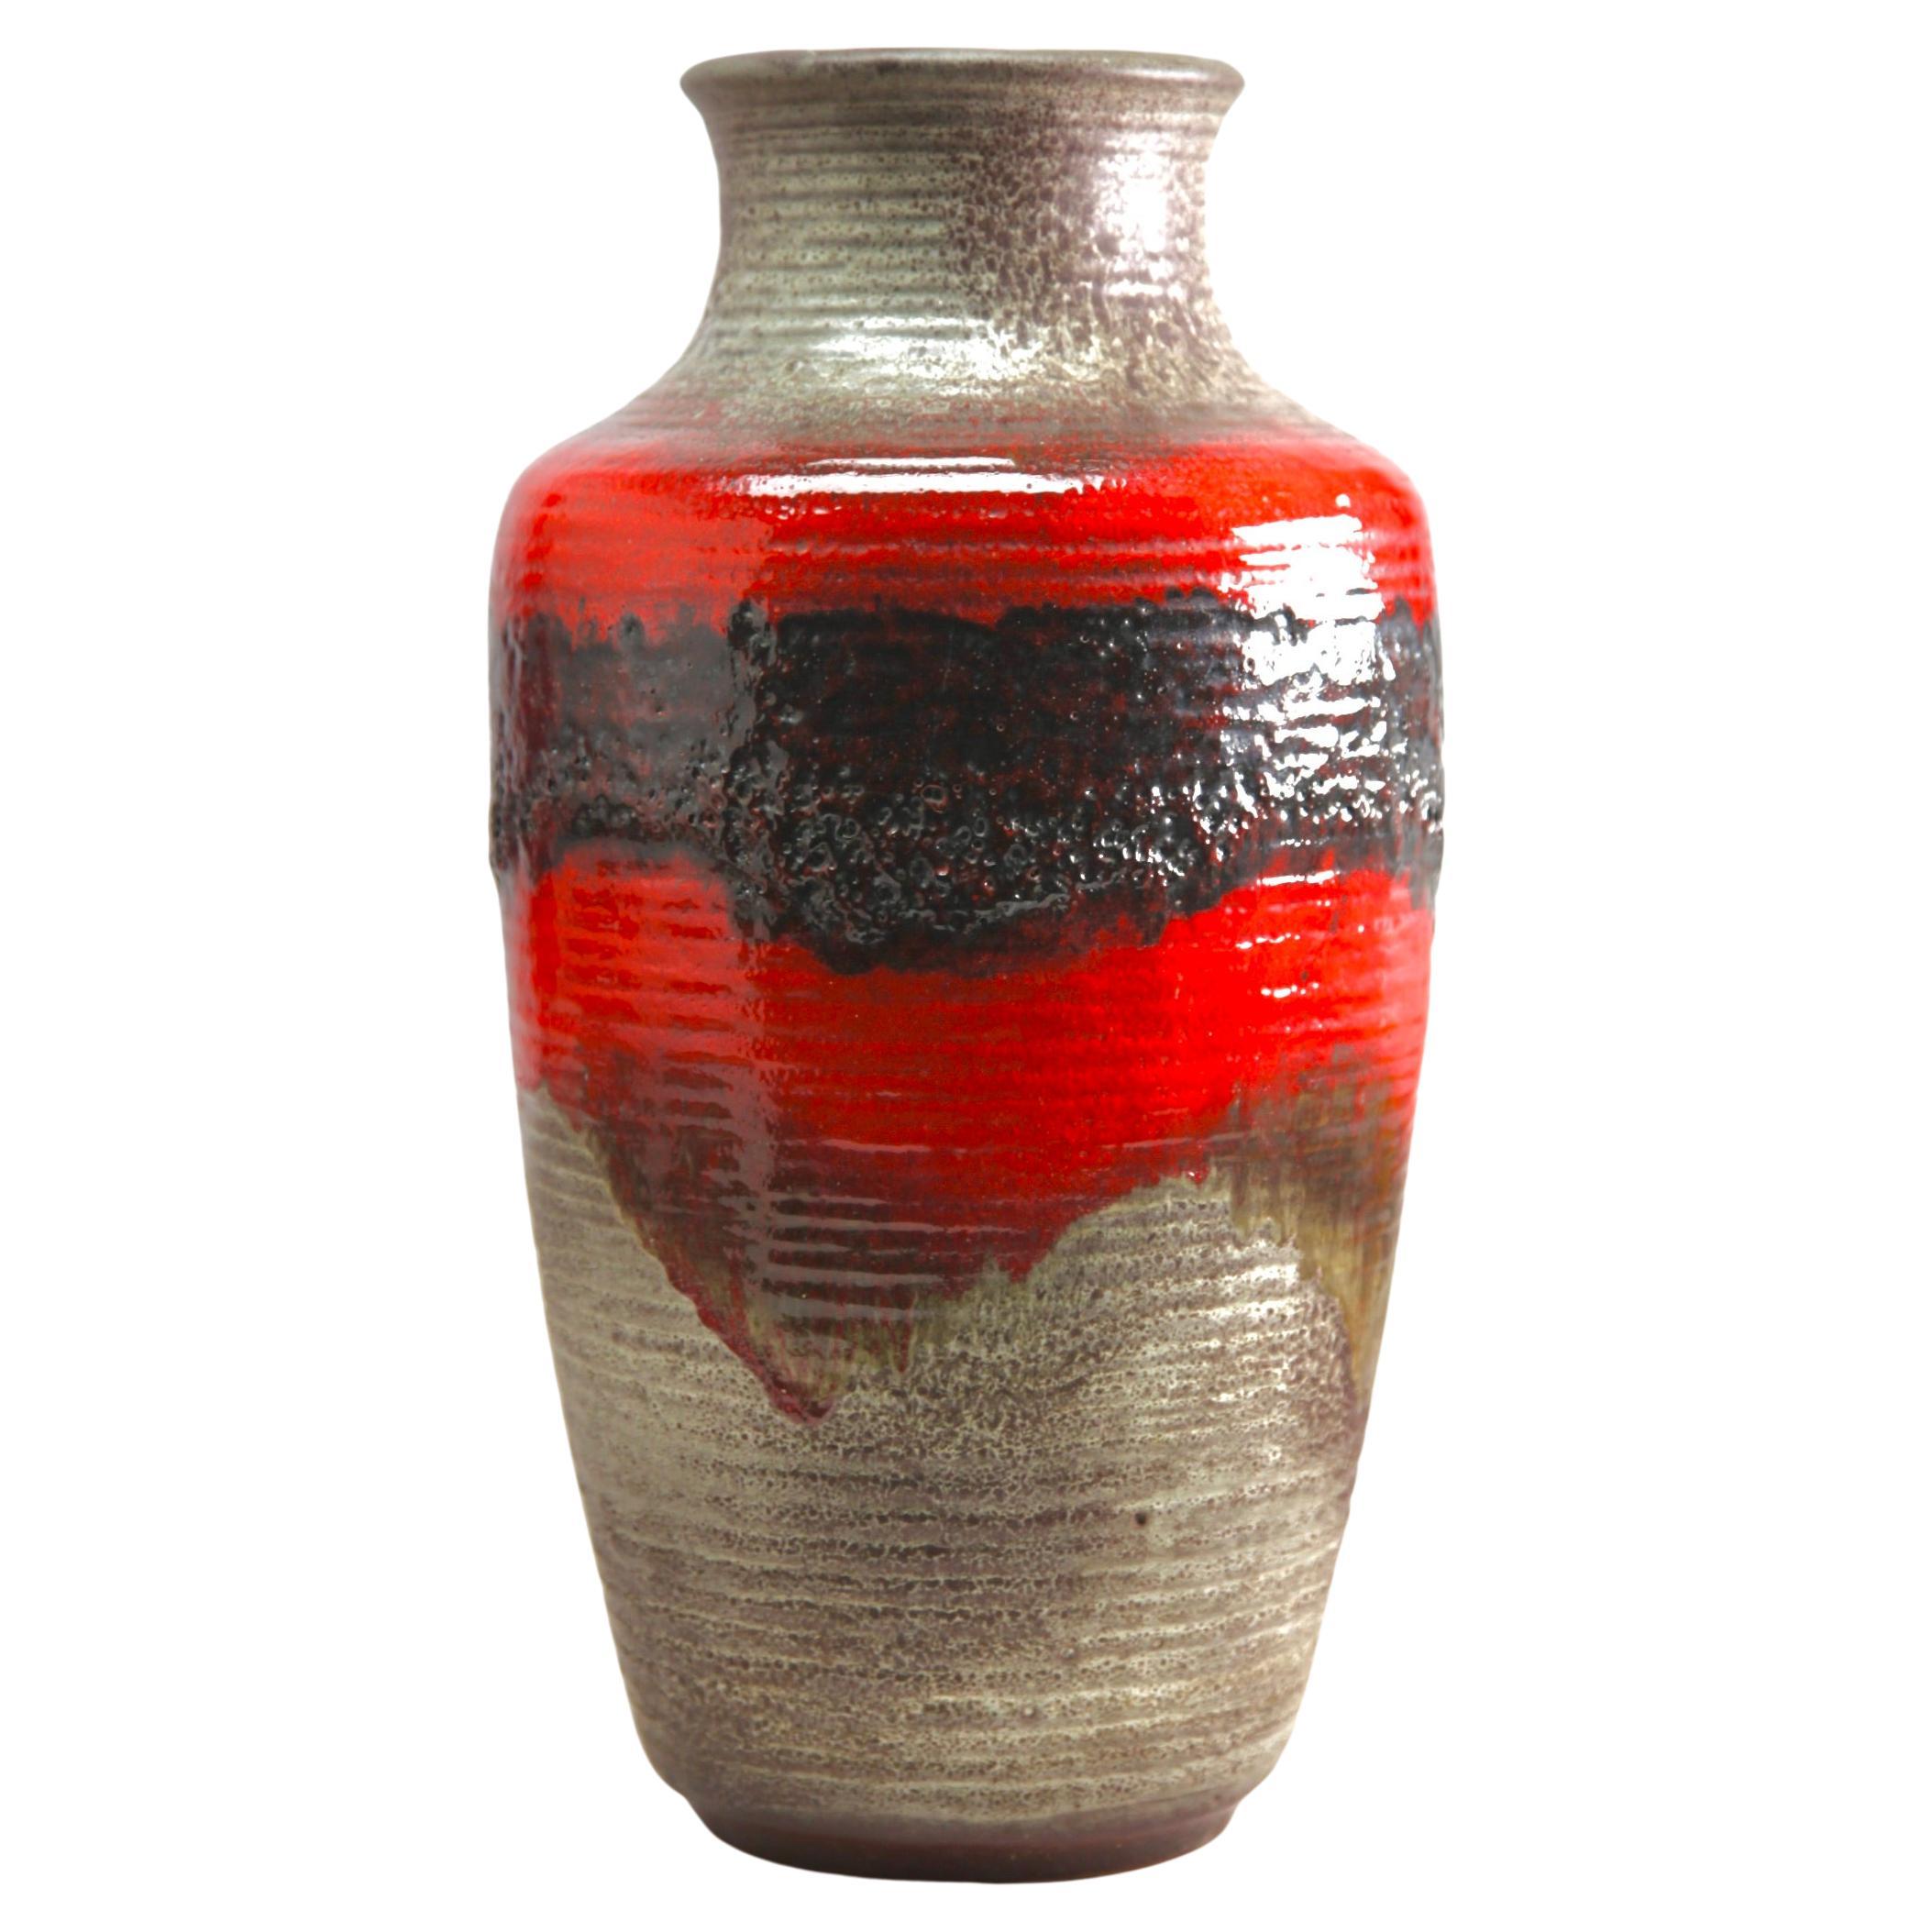 Carstens Tonnieshof Fat Lava Floor Vase with Red Drip-Glaze 7901-45 W-Germany'